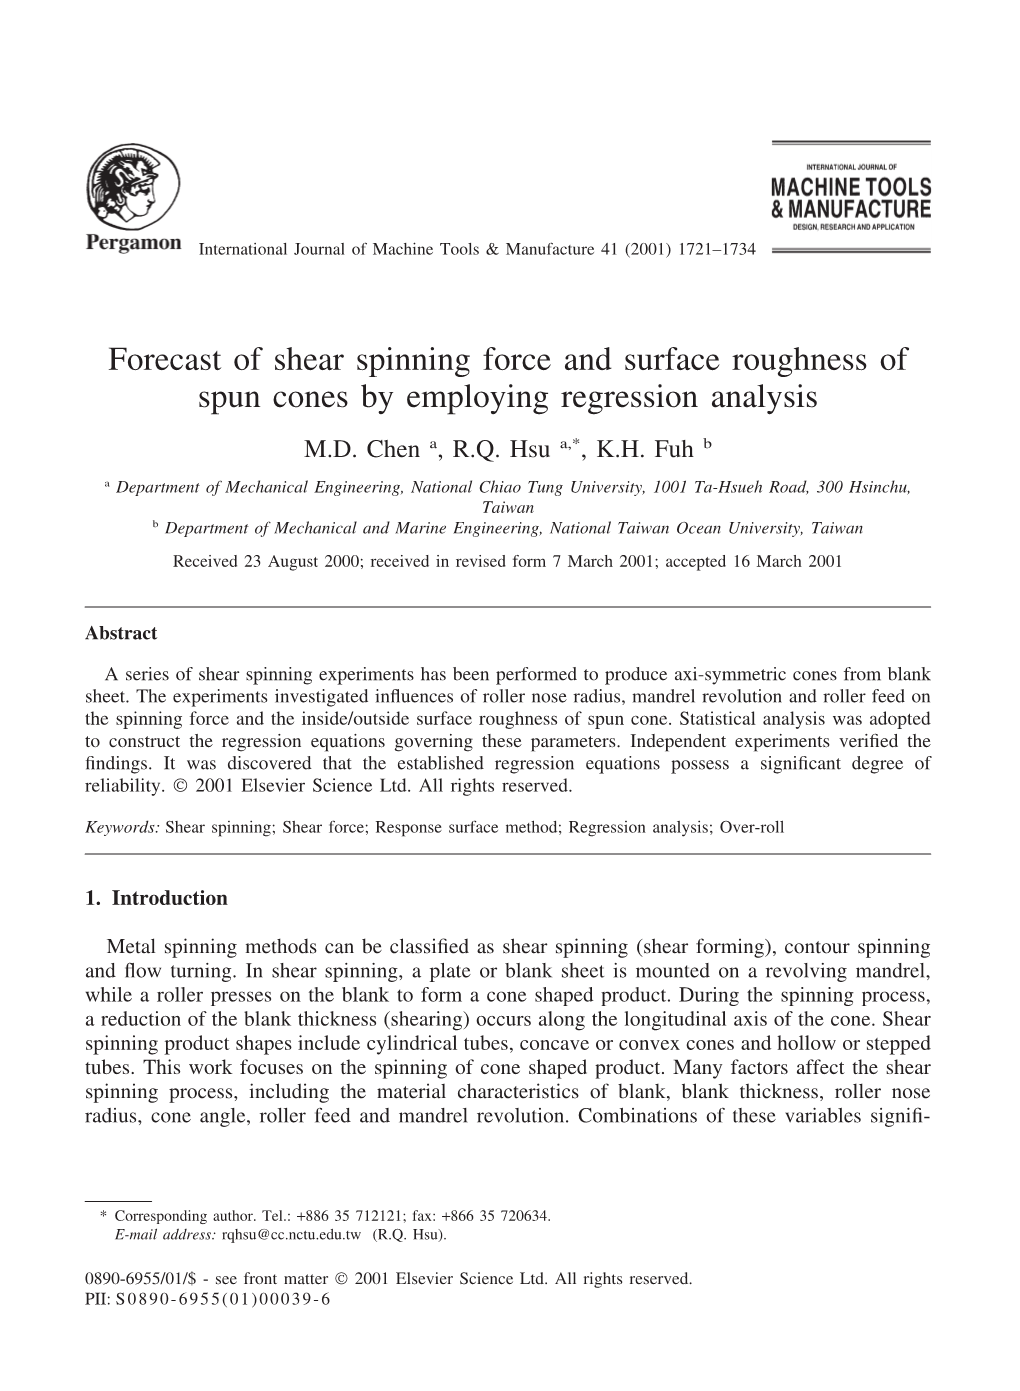 Forecast of Shear Spinning Force and Surface Roughness of Spun Cones by Employing Regression Analysis M.D